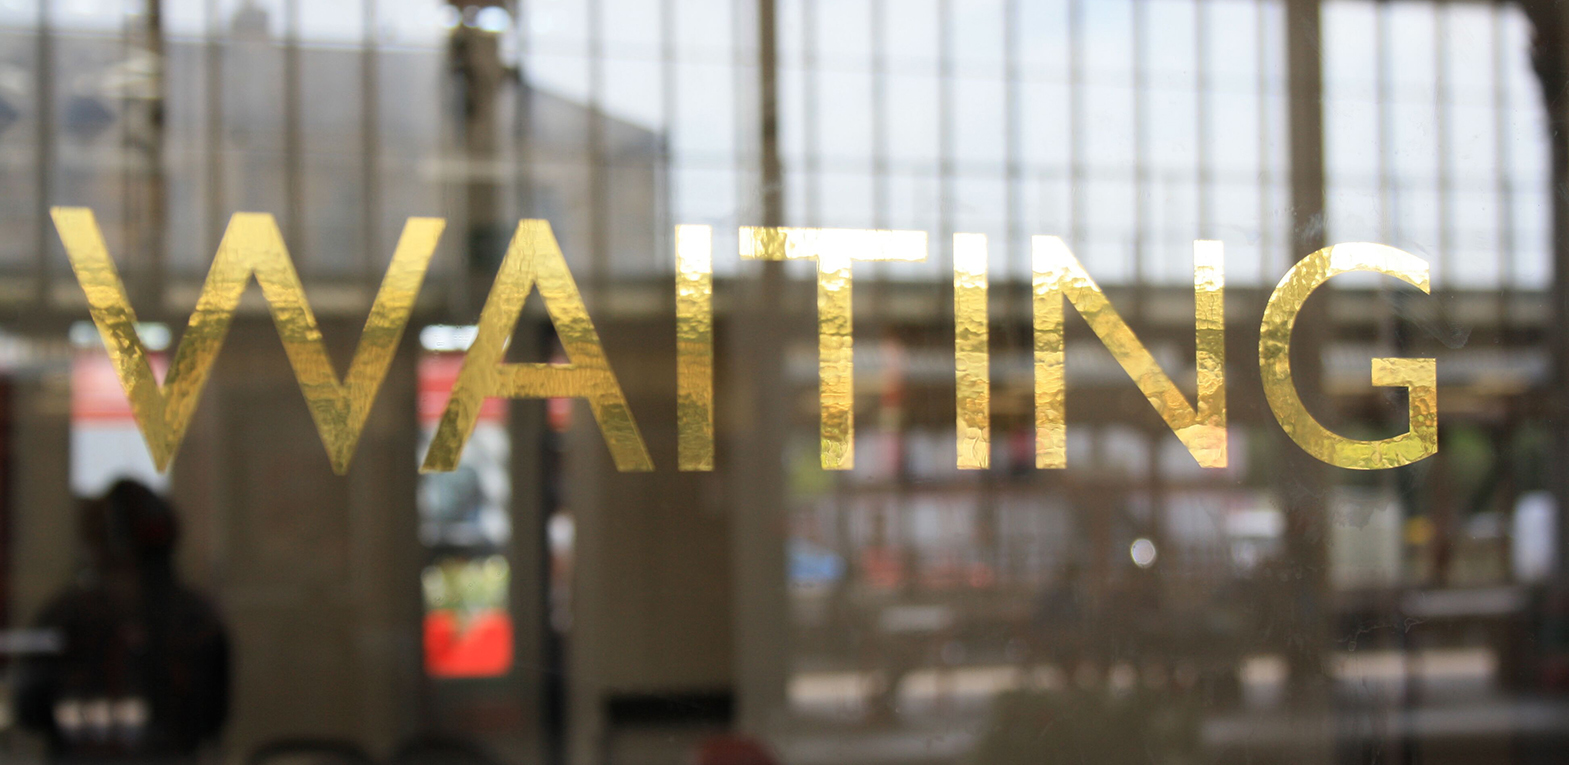 Letters on the windows of the waiting rooms of Preston train station as part of an artwork by Lisa Wigham. The word is 'waiting'